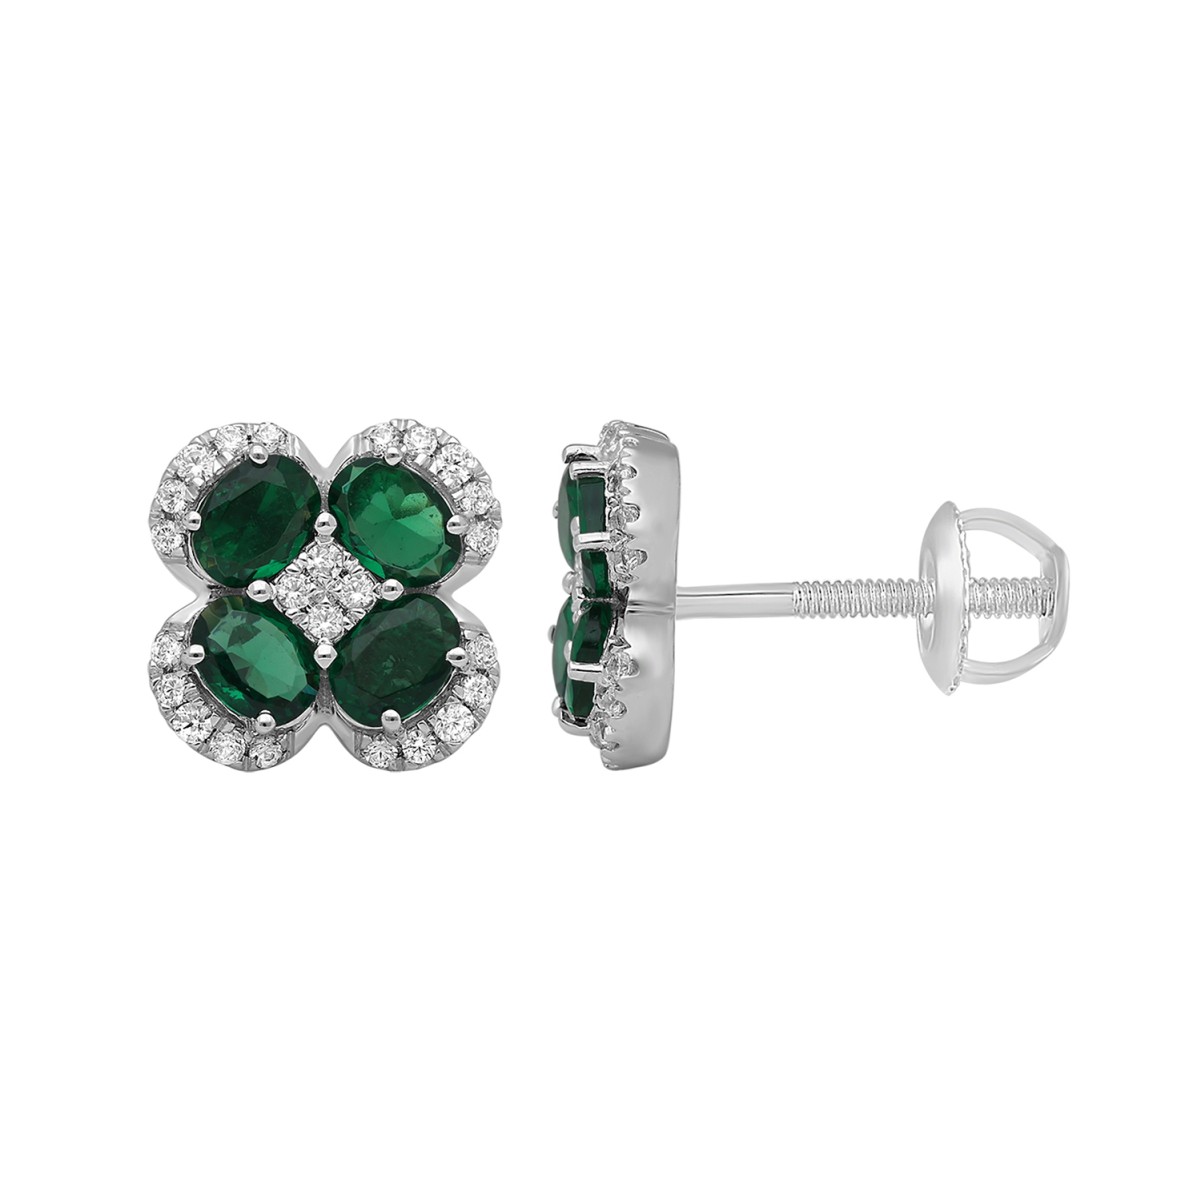 14K WHITE GOLD 2 1/4CT ROUND/OVAL DIAMOND LADIES EARRINGS(COLOR STONE OVAL GREEN EMERALD DIAMOND 2CT)